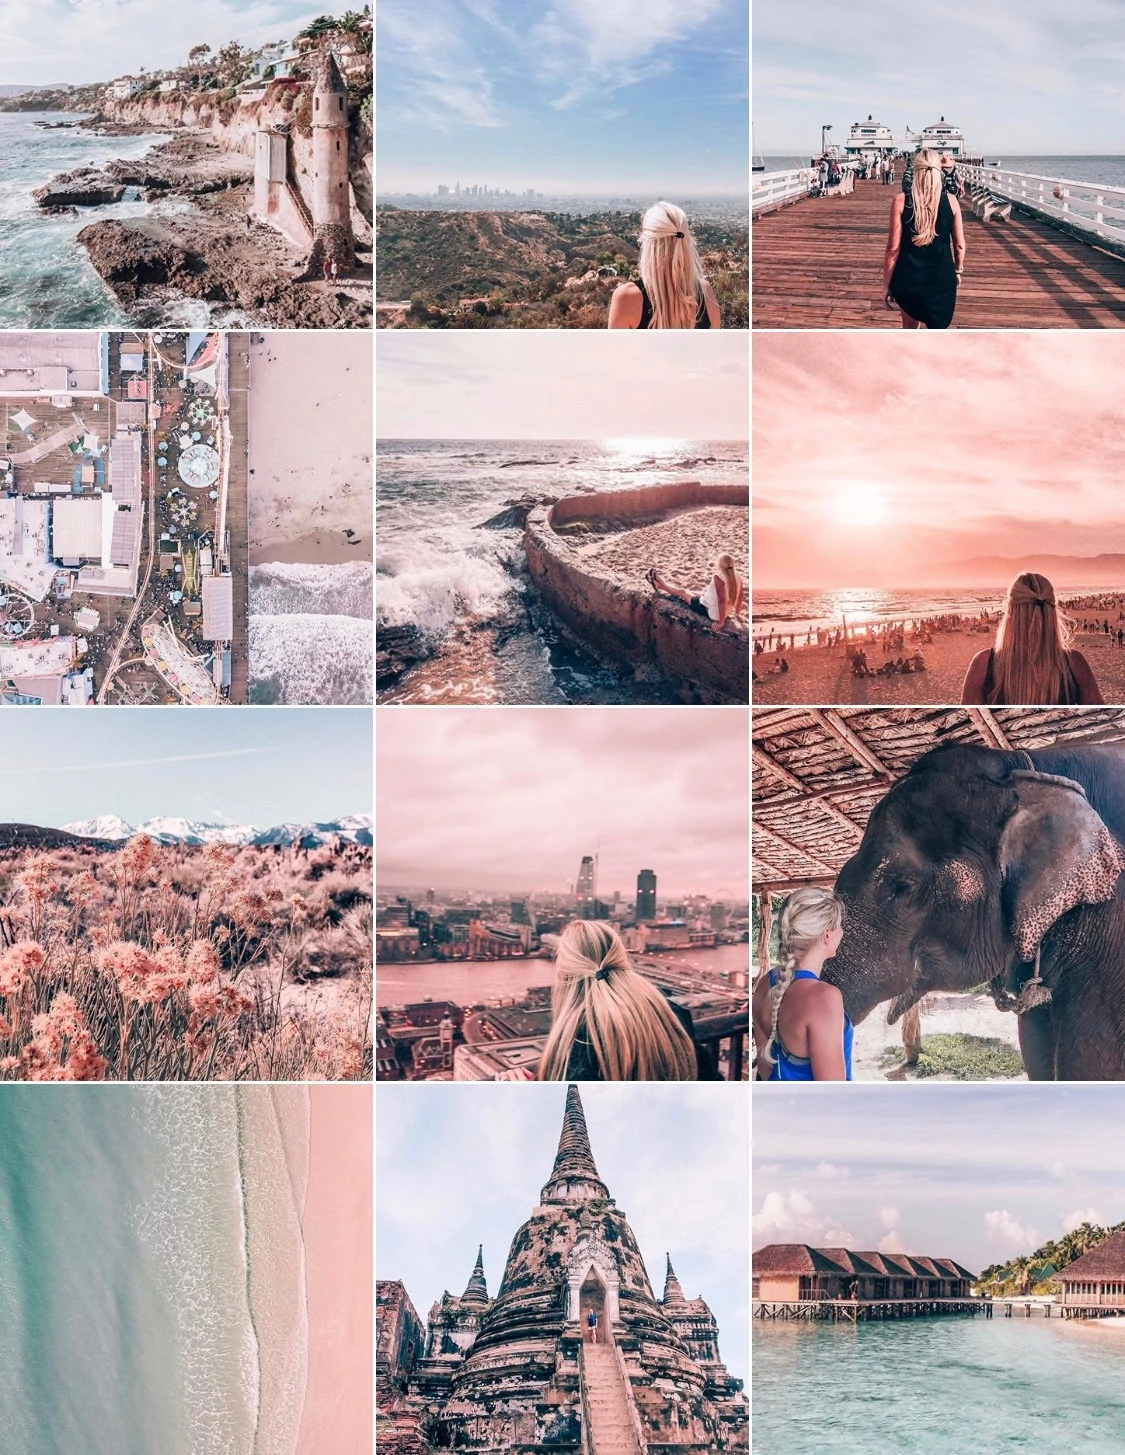 My Instagram feed after edits in Lightroom to make my feed cohesive. See how to grow your Instagram authentically on my blog post!